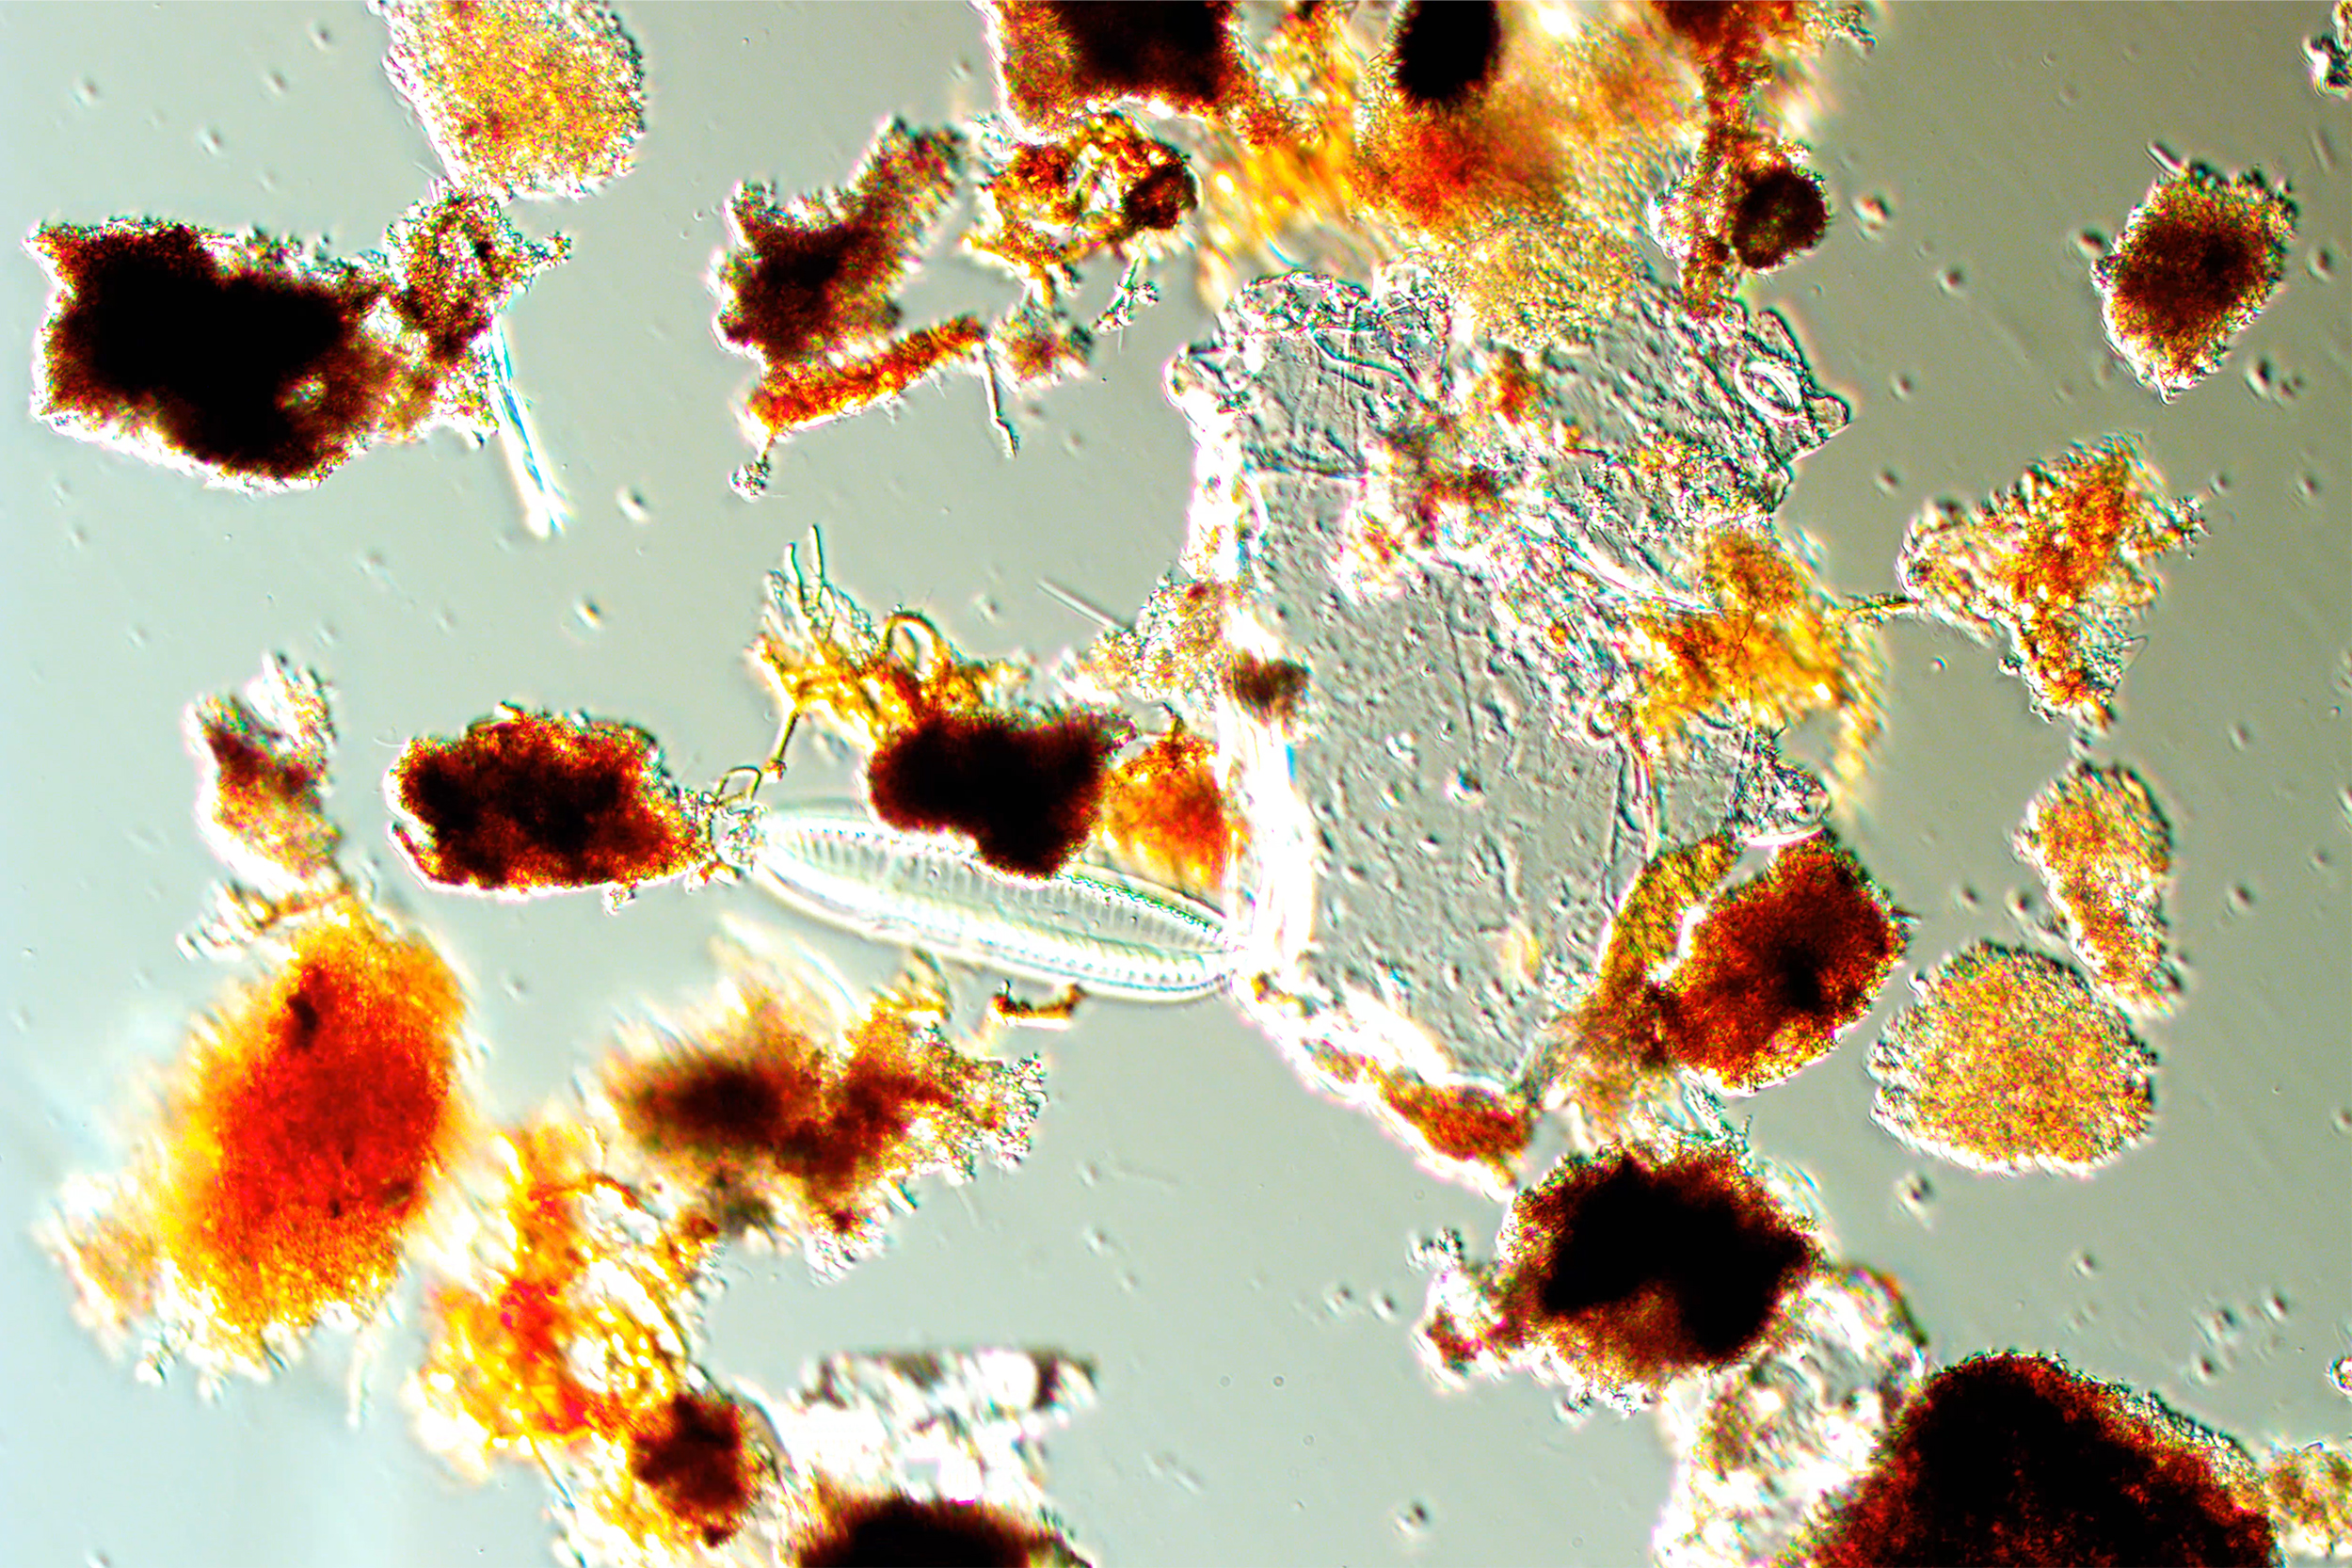 view of water samples through the microscope